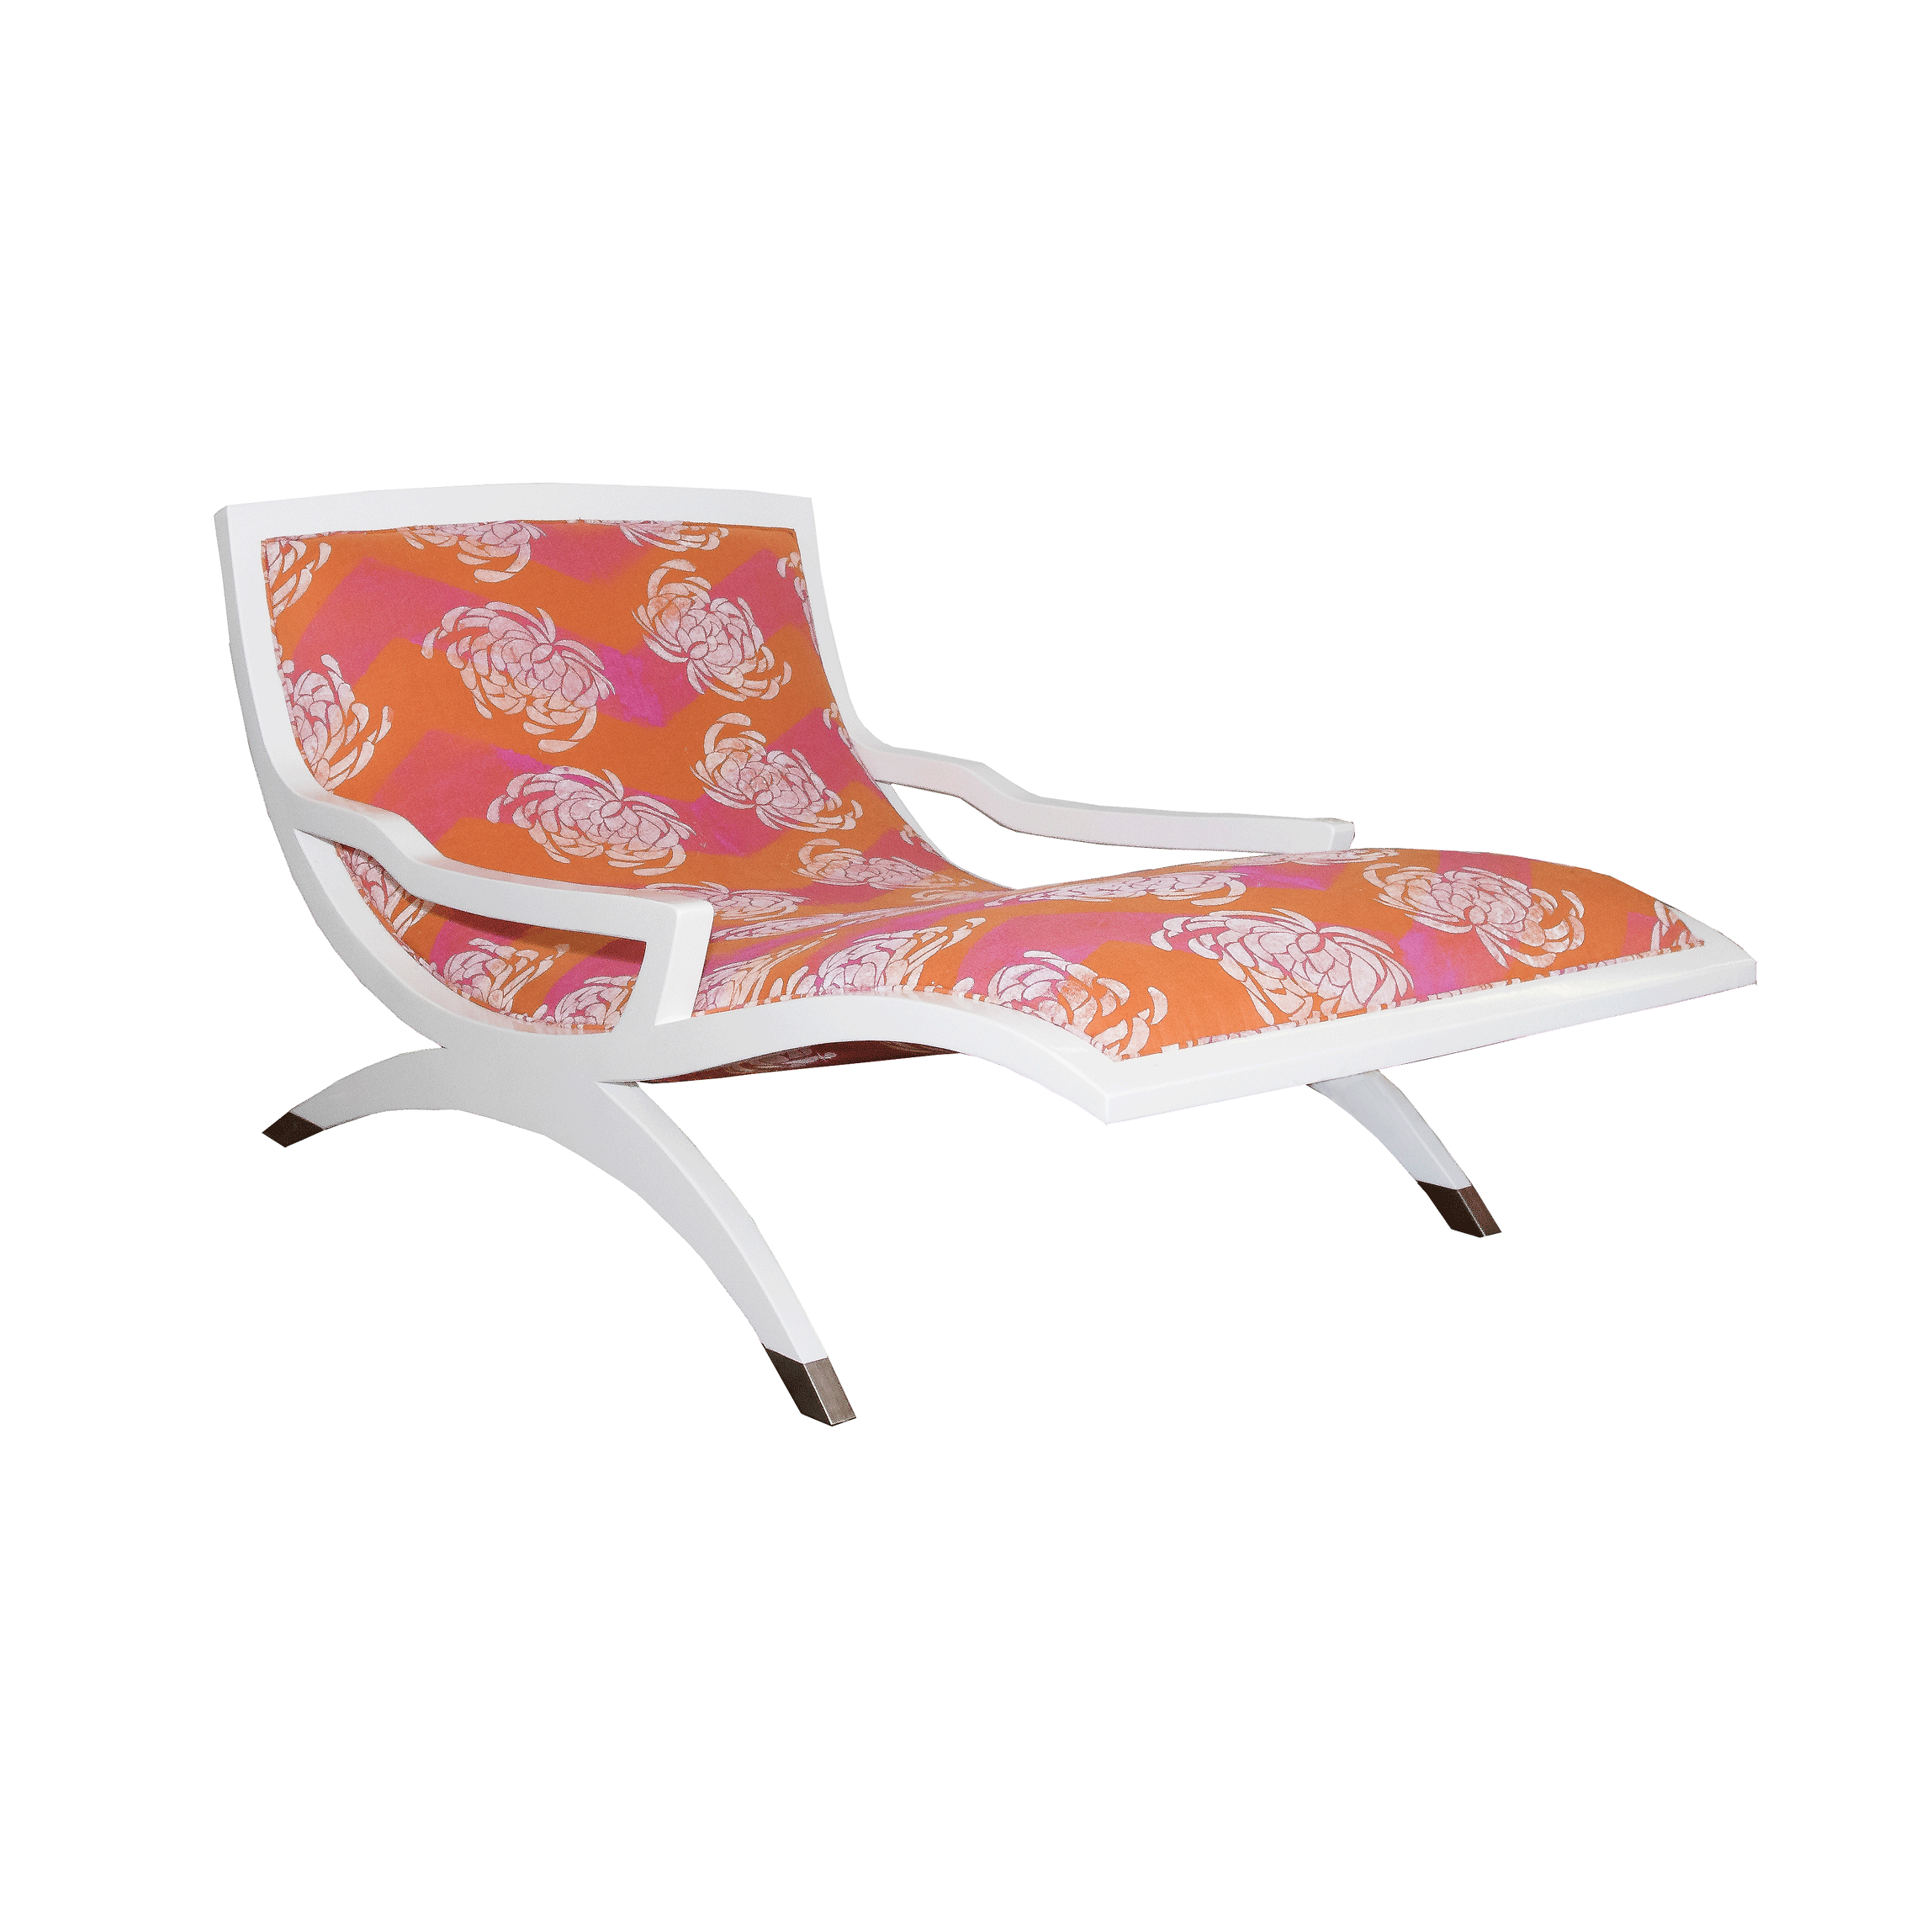 ana_maria_art_of_design_chaise.png